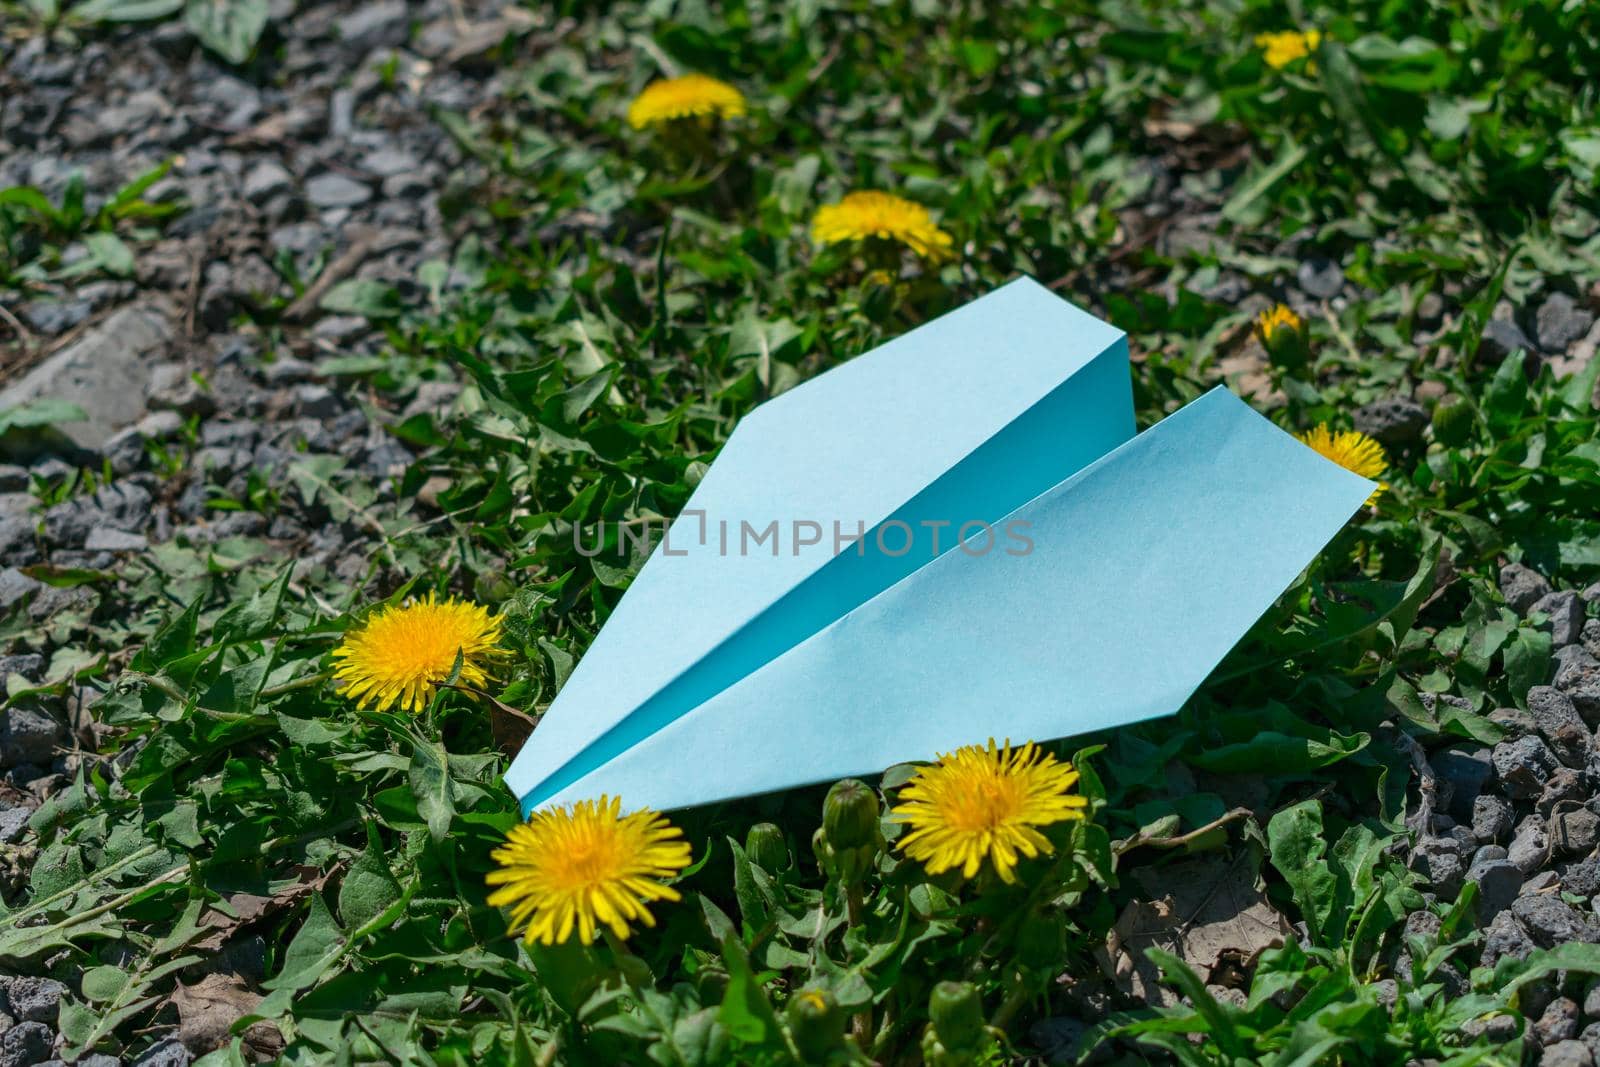 Children's toy paper plane lies in yellow flowers and grass on the ground